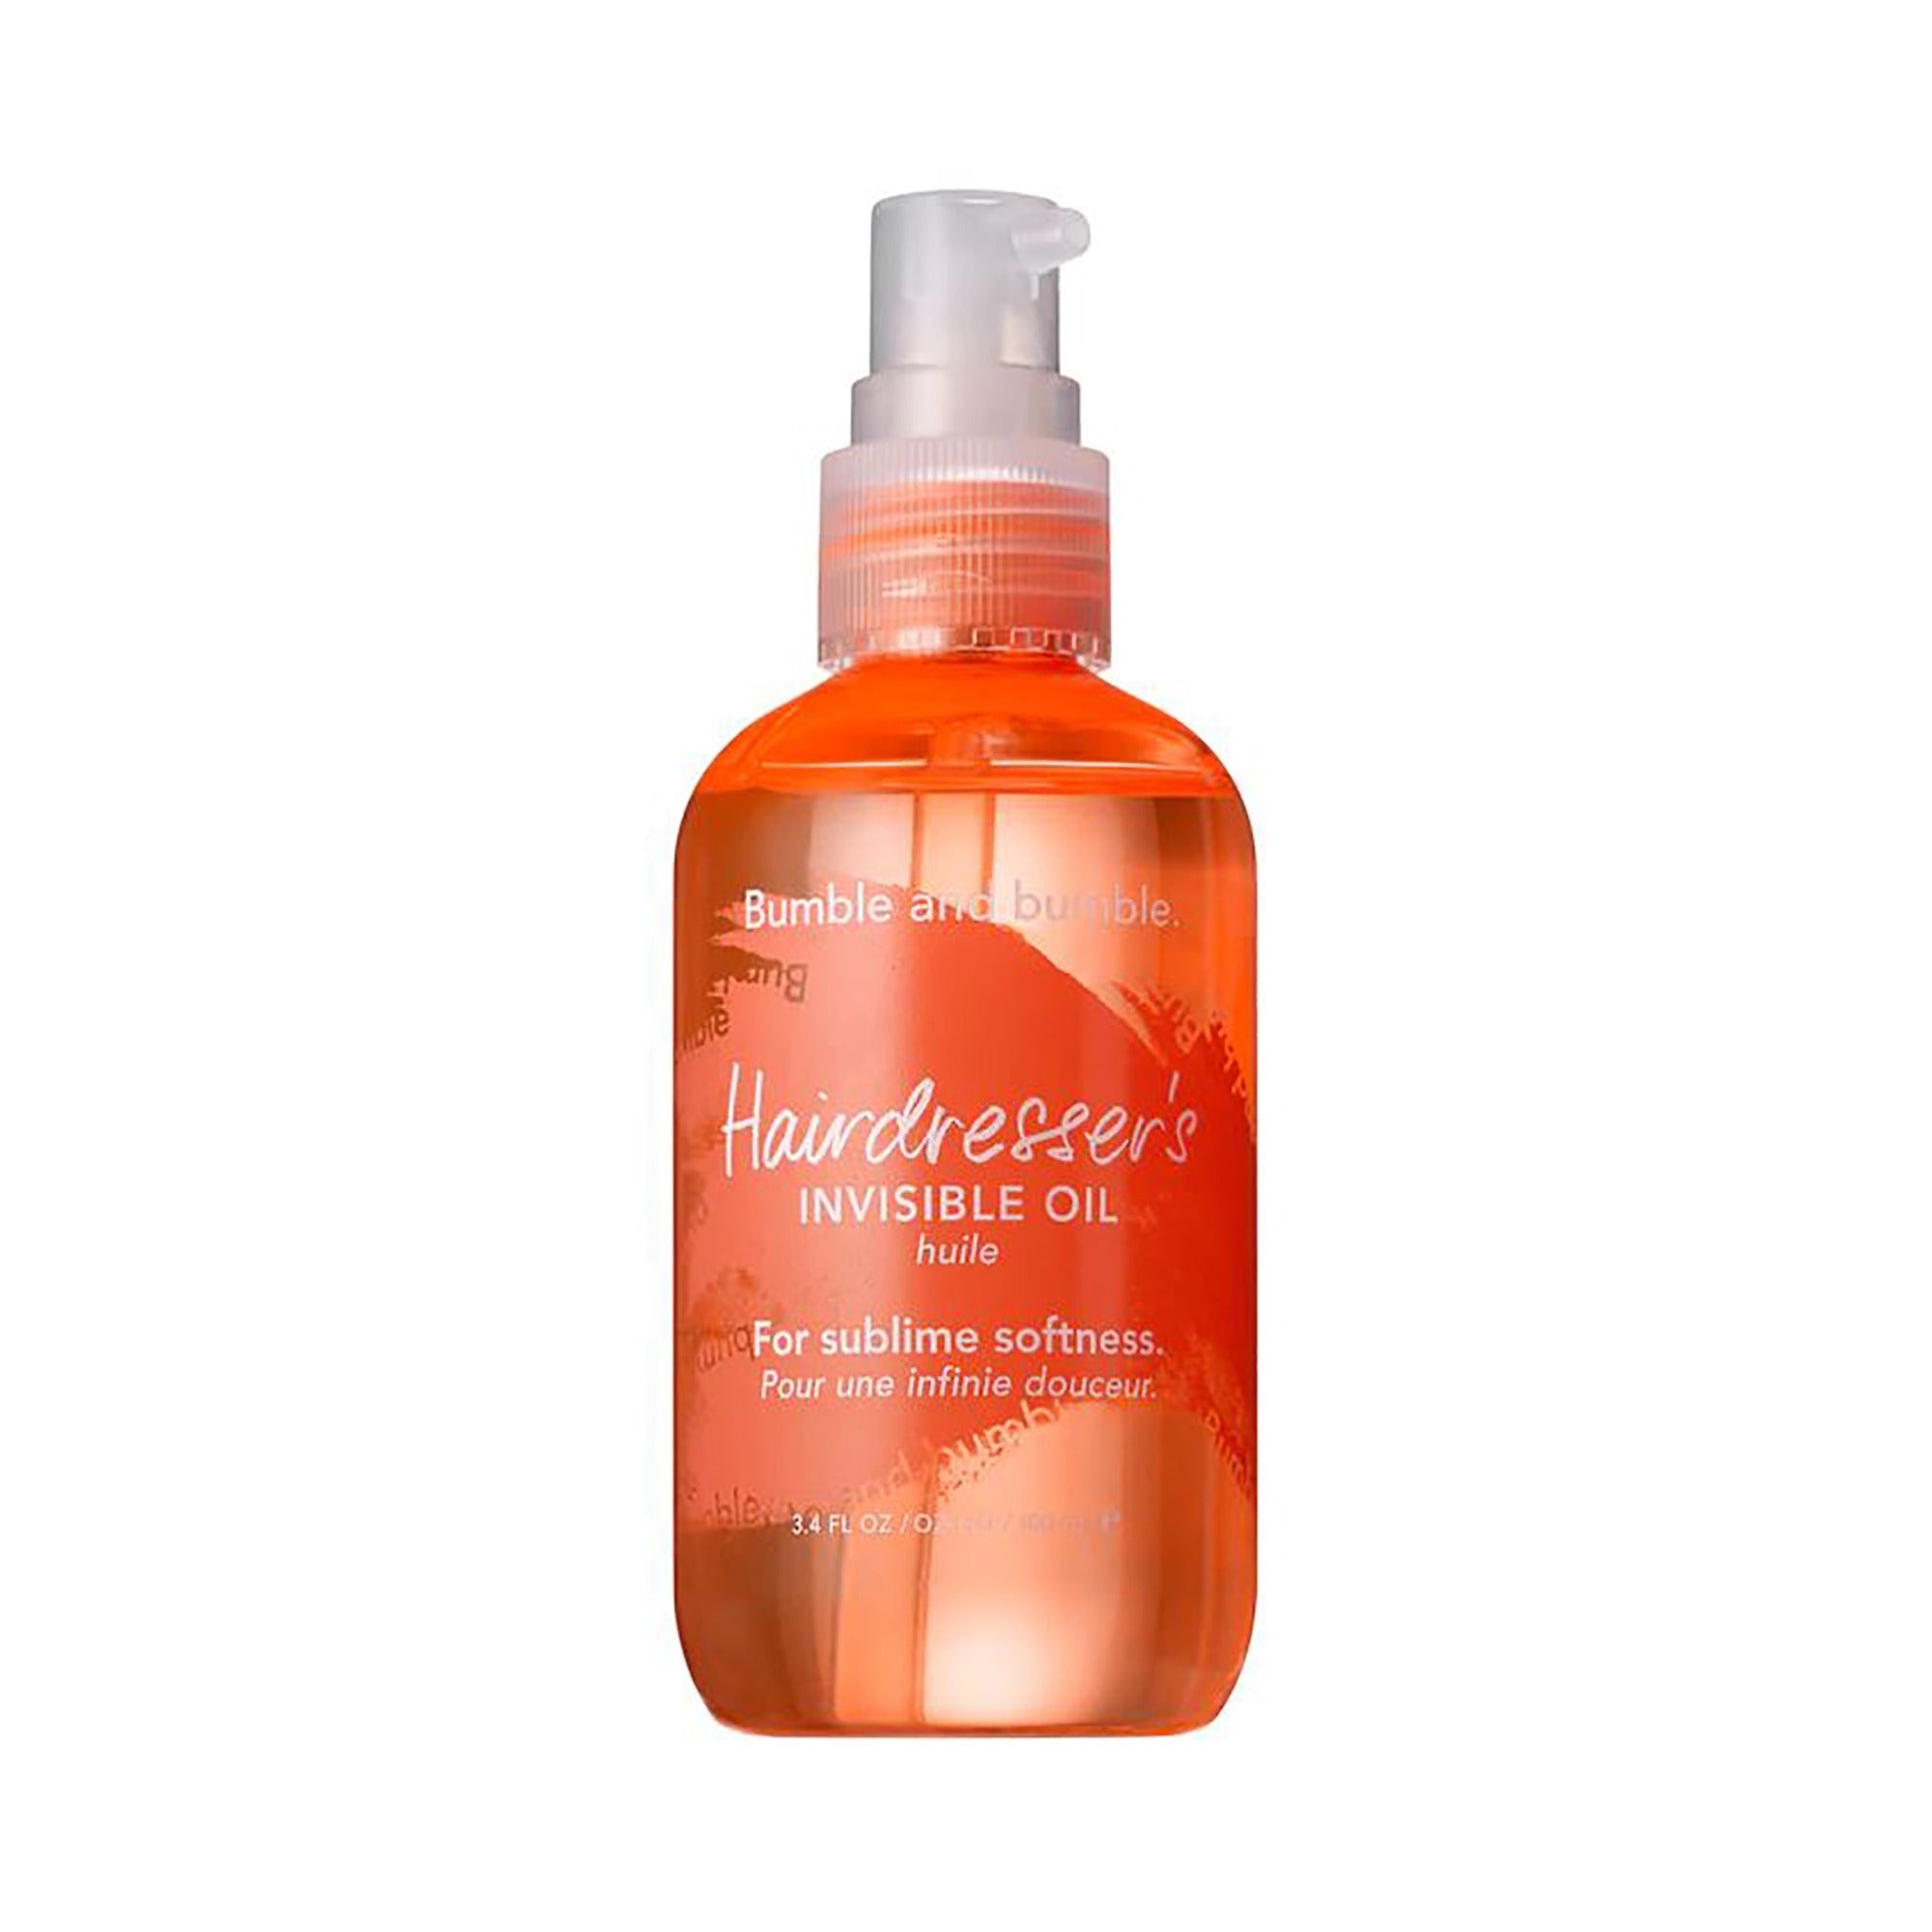 Bumble and bumble Hairdresser's Invisible Oil / 3.4OZ